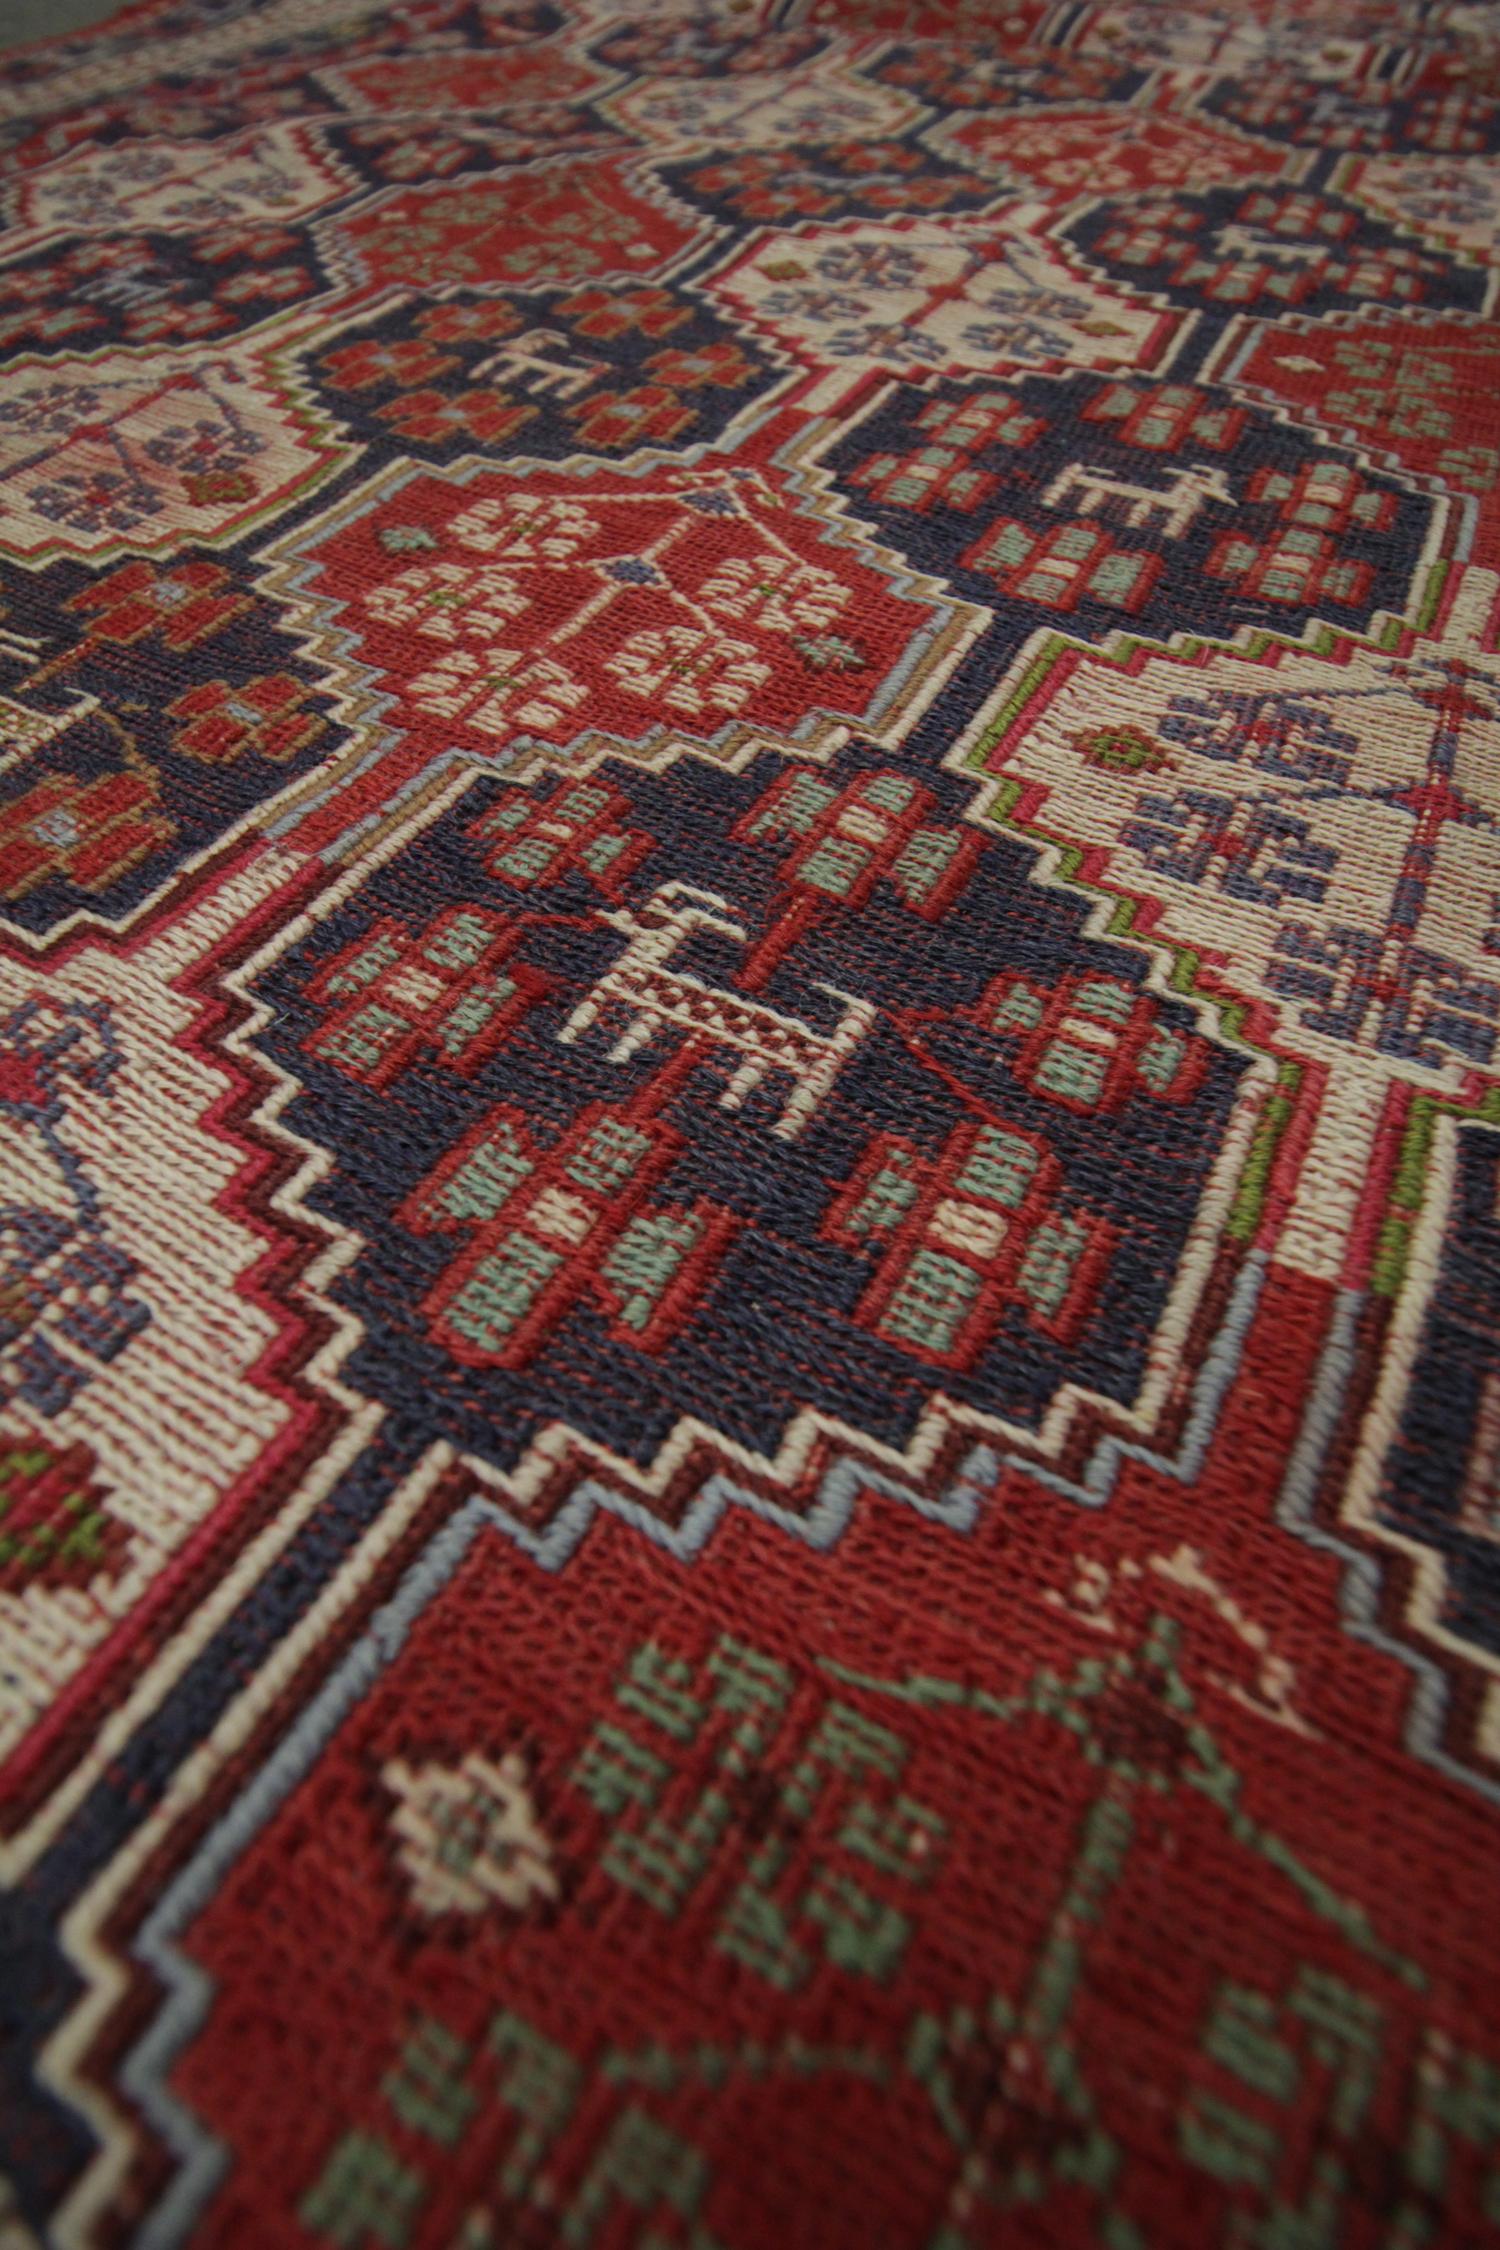 Mid-20th Century Handwoven Kilims Oriental Area Rug, Traditional Sumakh Kilim Red Wool Carpet For Sale